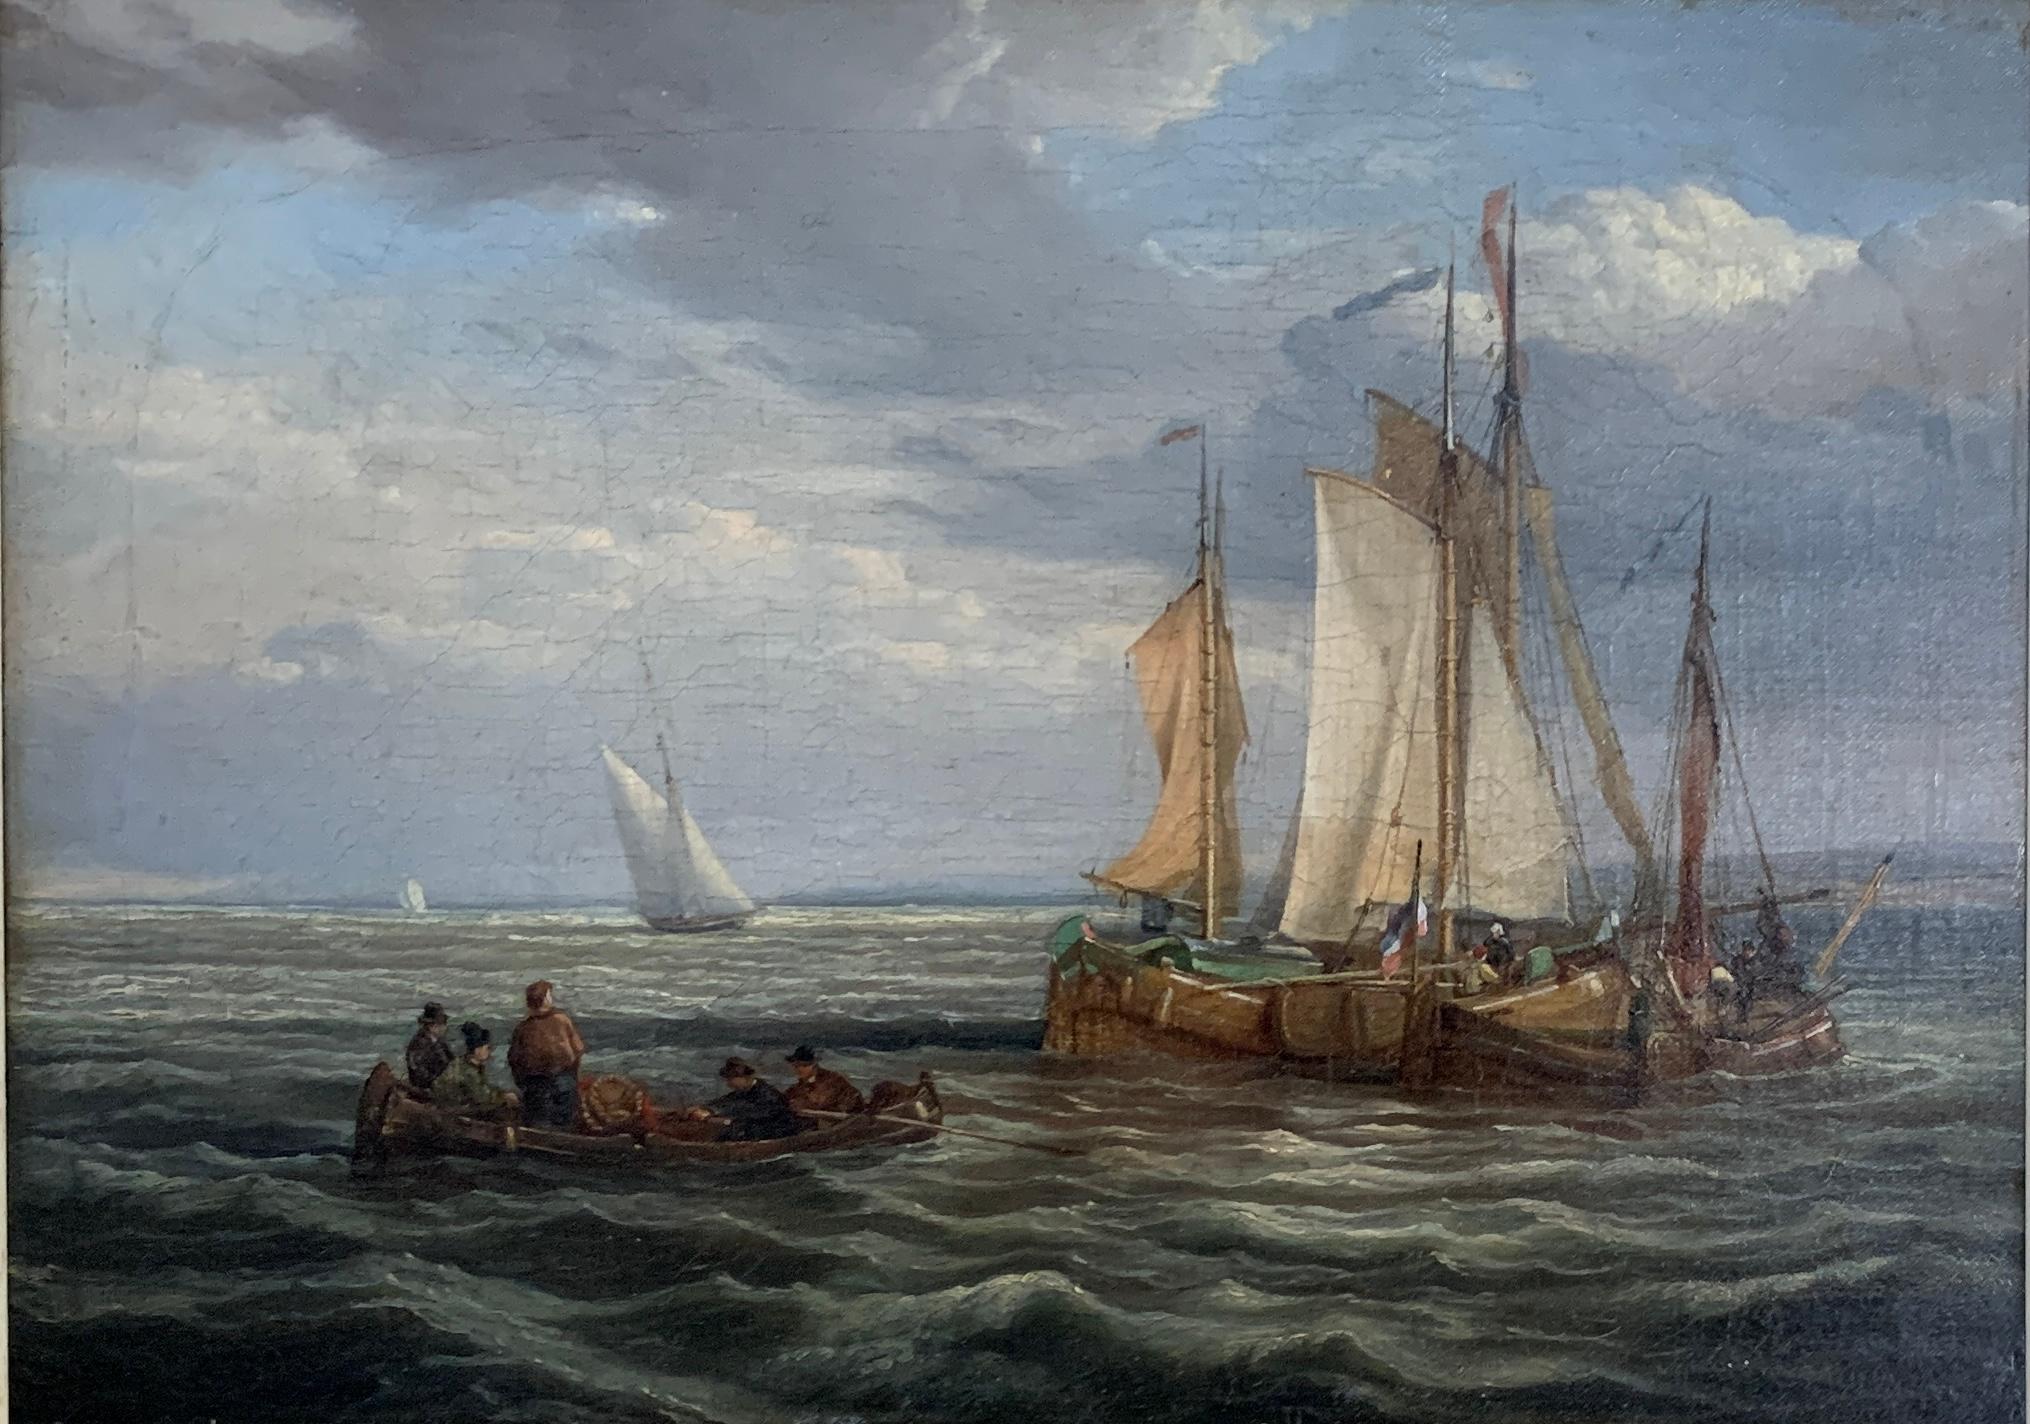 Antique Dutch 19th century ships at sea, fishing boats, men rowing. - Painting by Dutch 19th century School